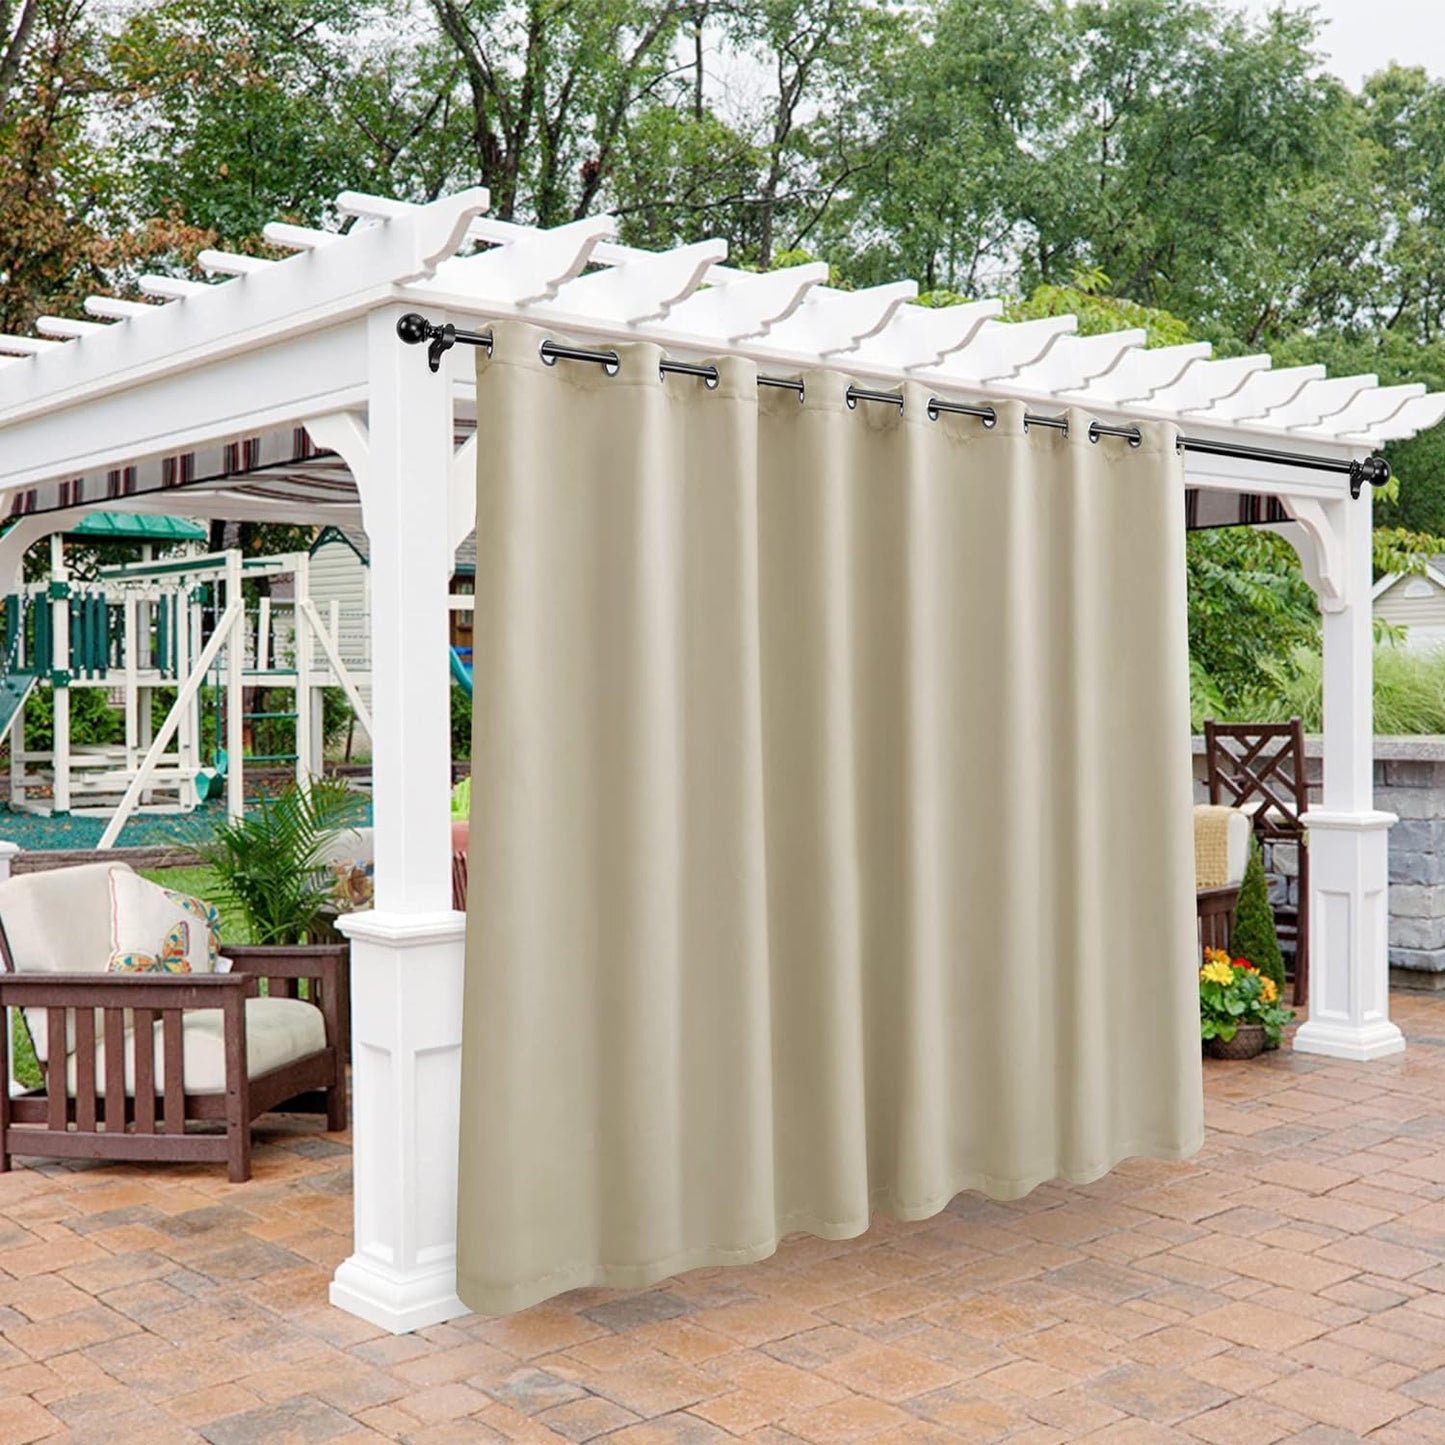 BONZER Outdoor Curtains for Patio Waterproof - Light Blocking Weather Resistant Privacy Grommet Blackout Curtains for Gazebo, Porch, Pergola, Cabana, Deck, Sunroom, 1 Panel, 52W X 84L Inch, Silver  BONZER Cream 120W X 84 Inch 